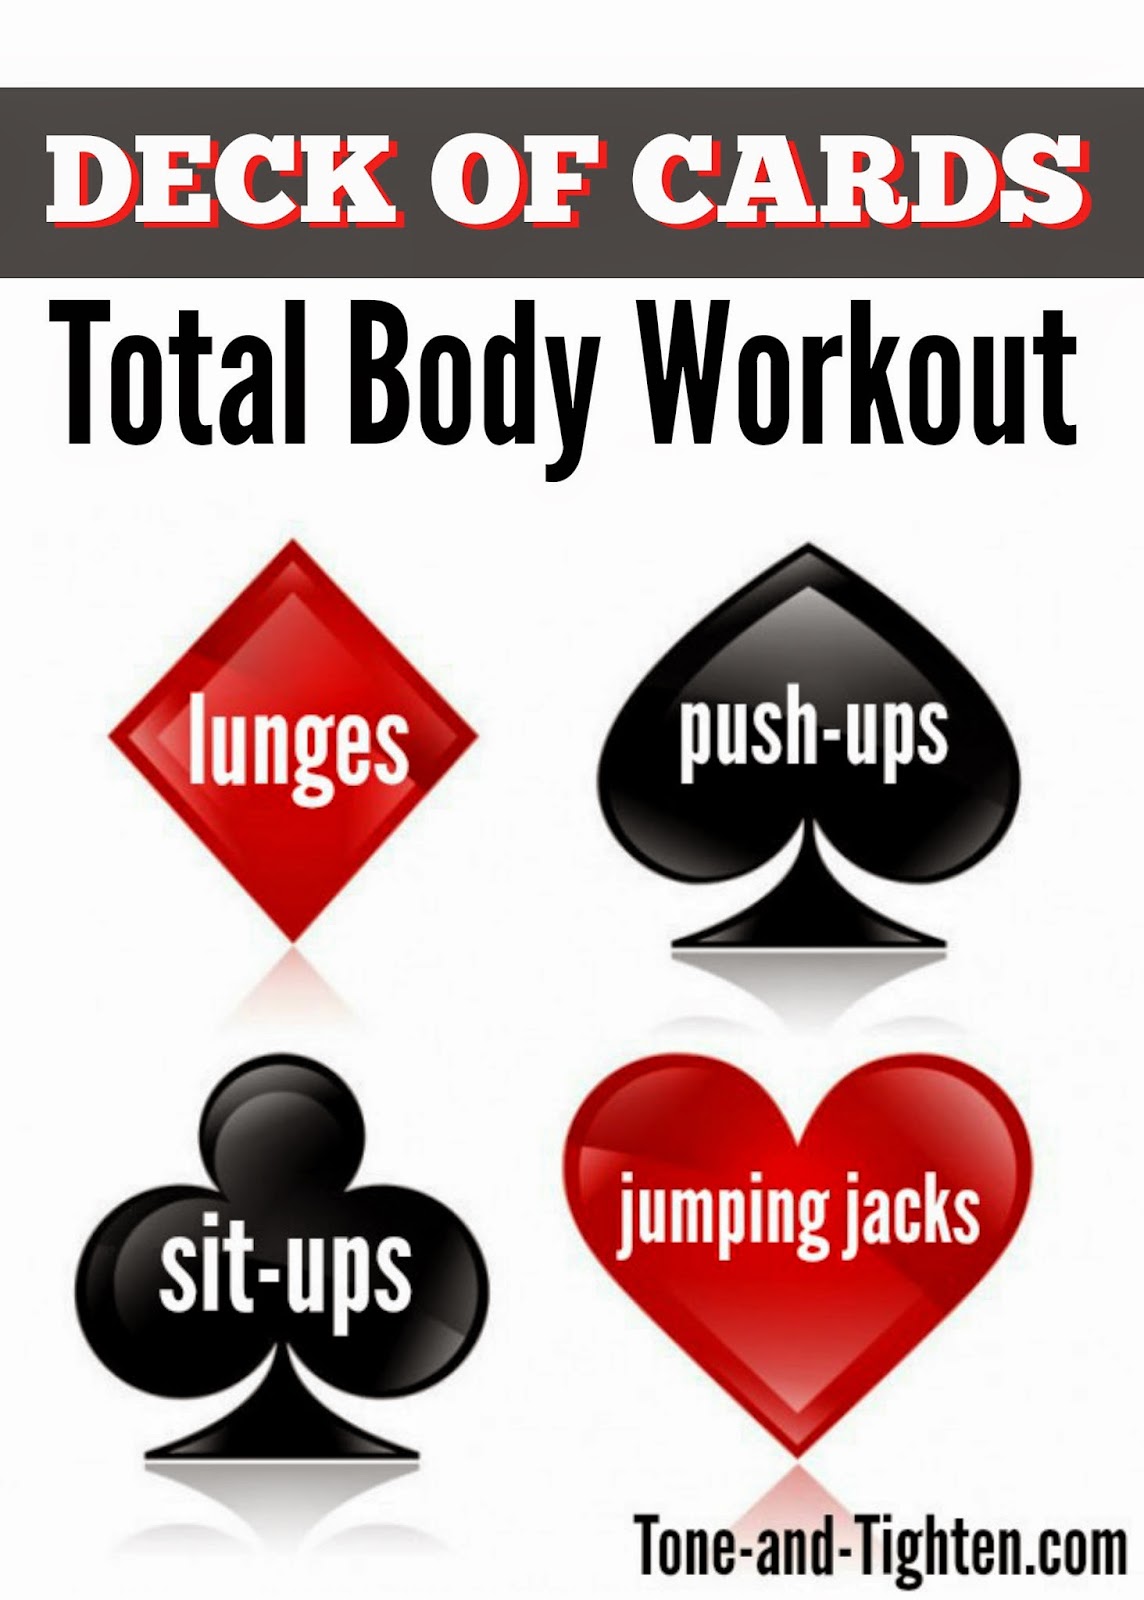 Deck of Cards At Home Total Body Workout